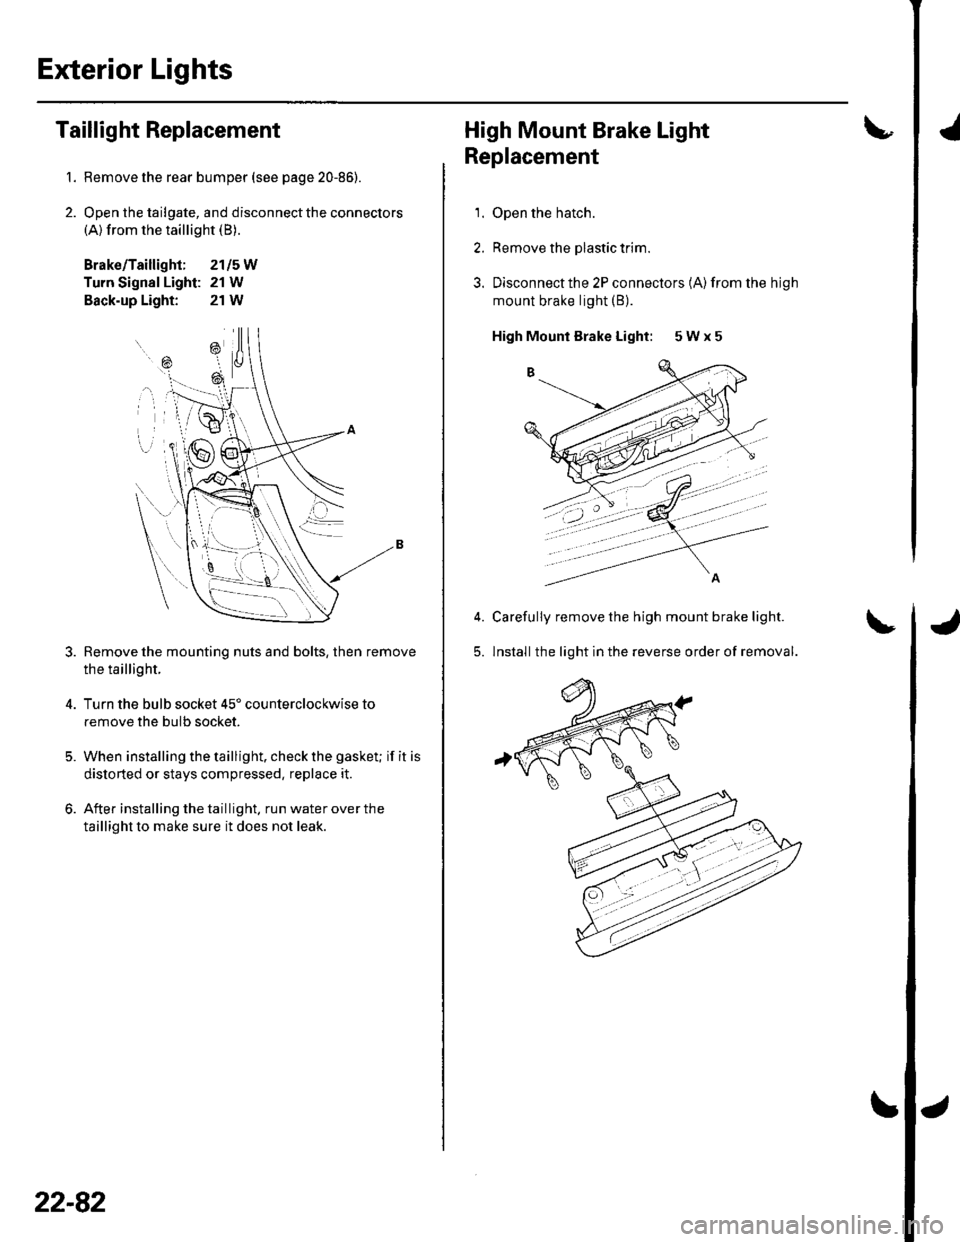 HONDA CIVIC 2003 7.G User Guide Exterior Lights
1.
2.
Taillight Replacement
Remove the rear bumper (see page 20-86).
Open the tailgate, and disconnect the connectors(A) from the taillight (B).
Brako/Taillight; 2115W
Turn Signal Ligh